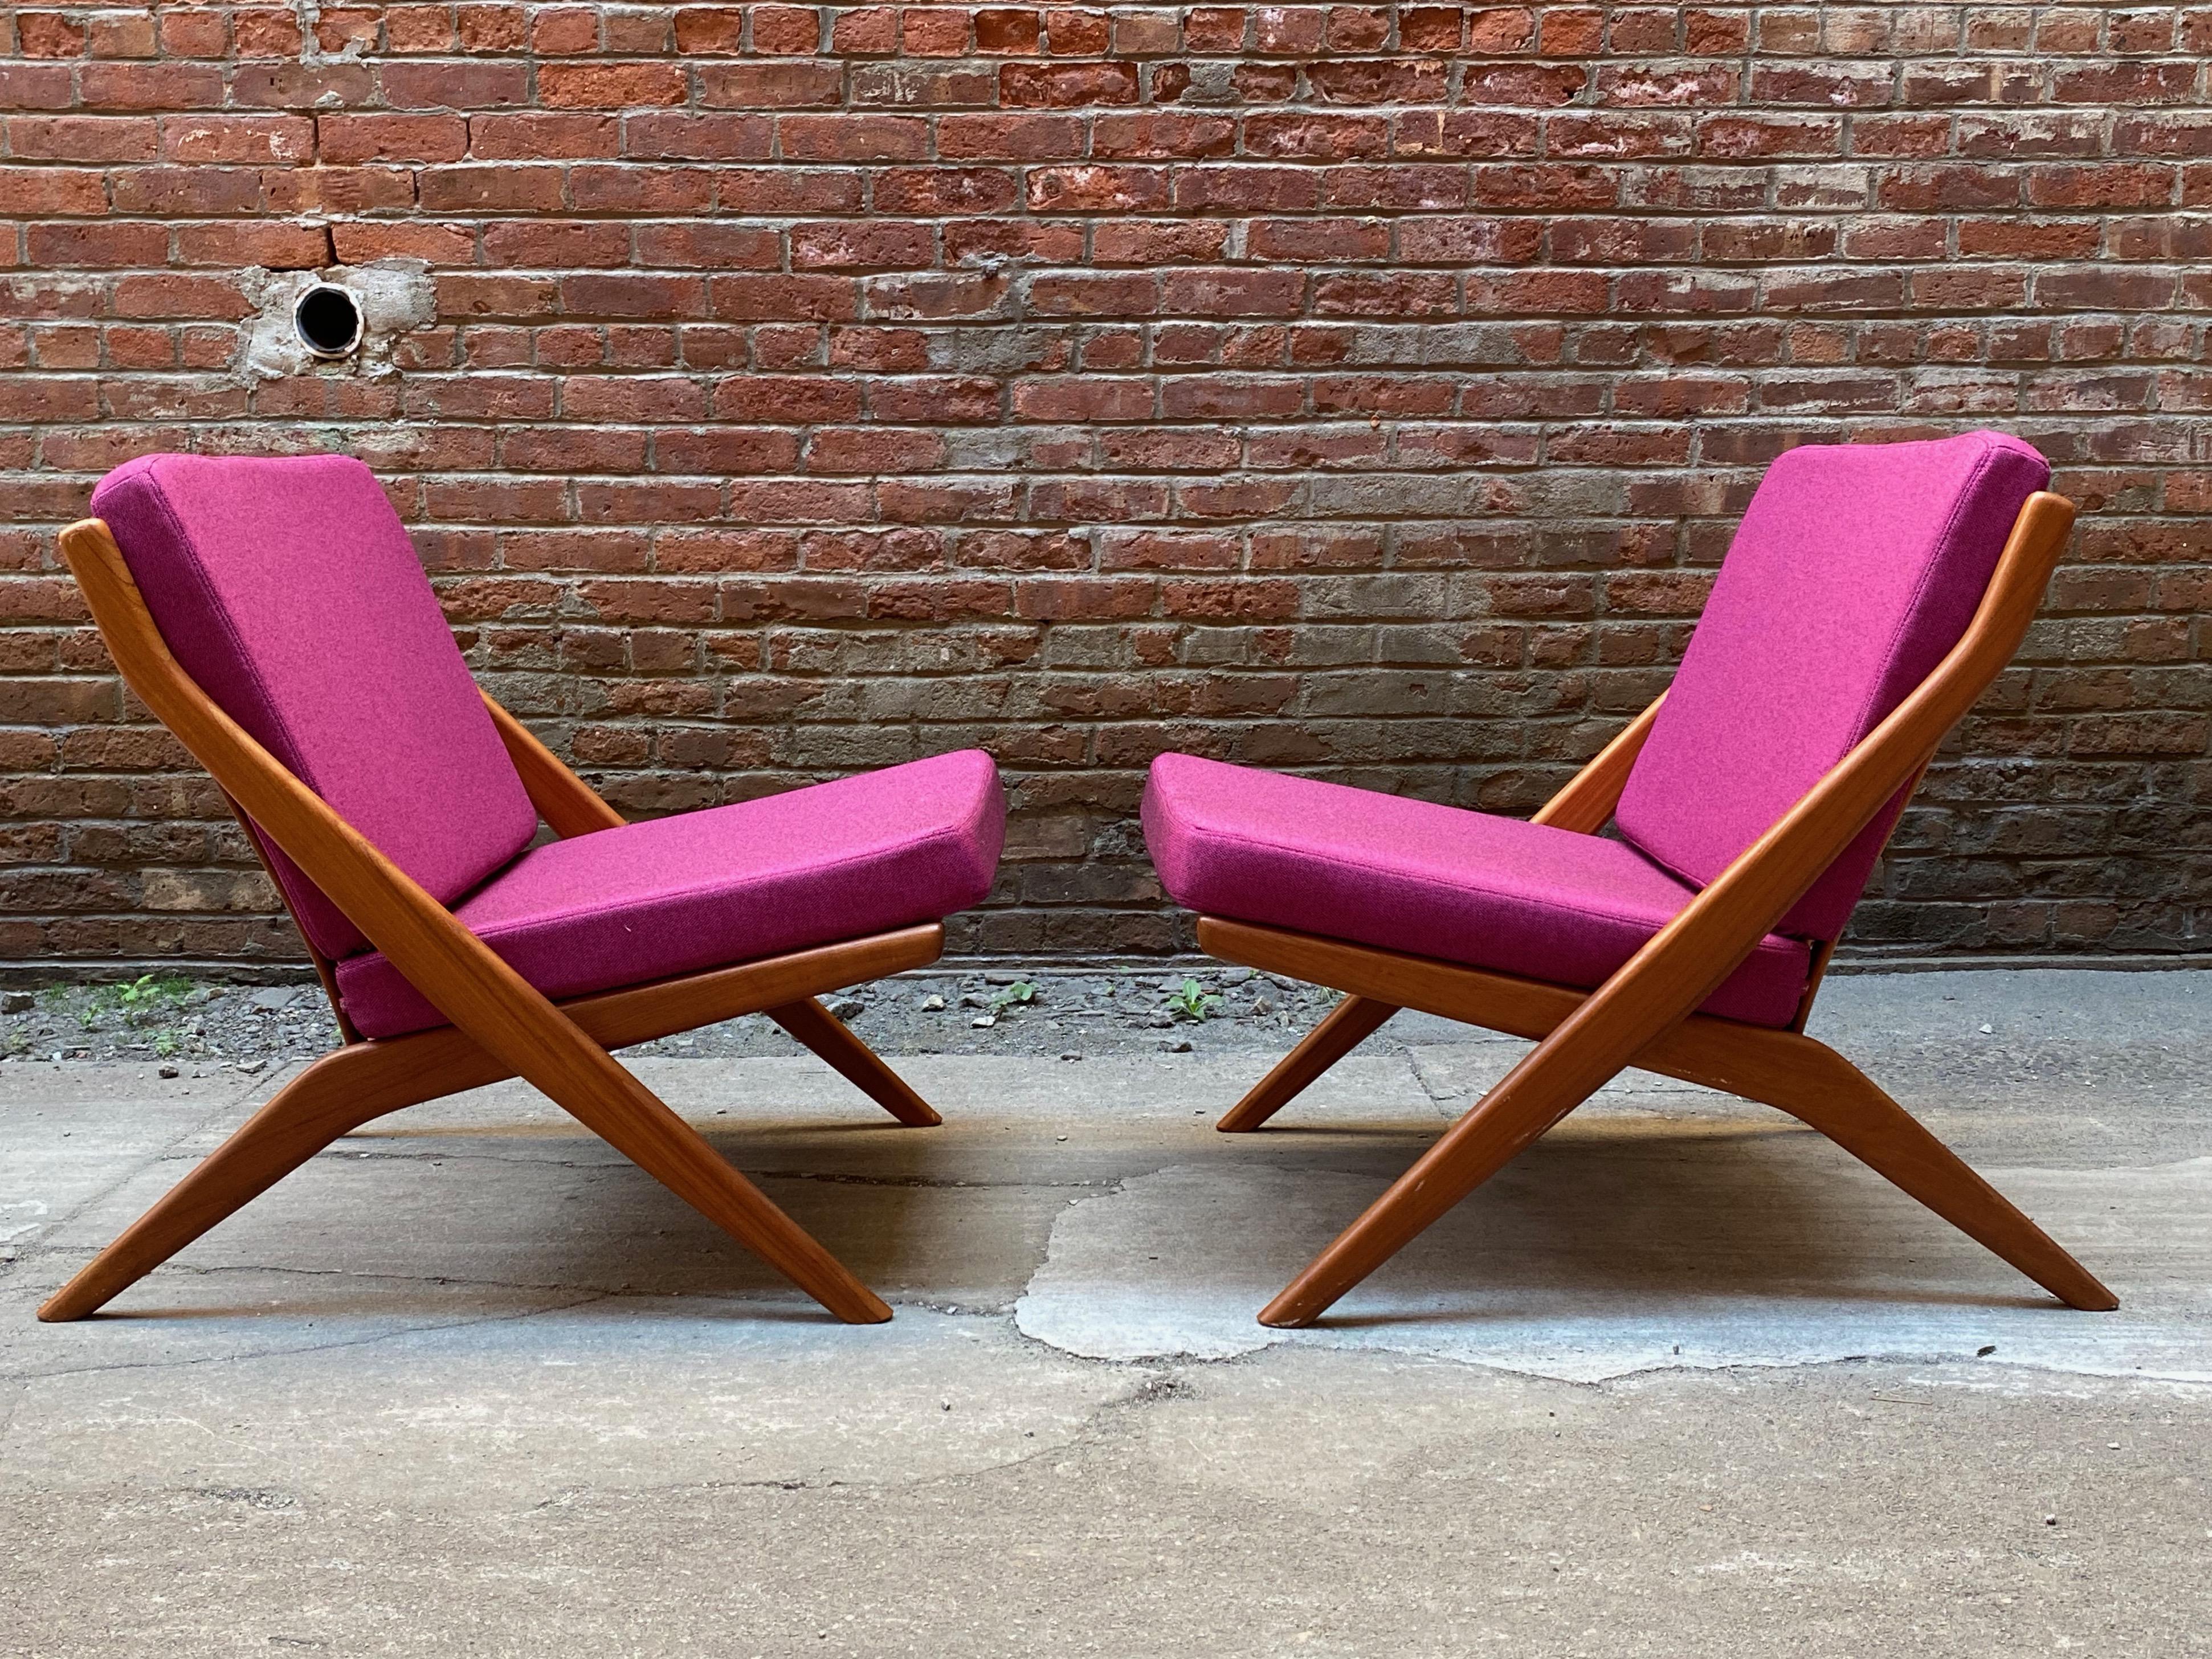 Pair of Folke Ohlsson designed scissor chairs for Dux of Sweden. Solid teak construction with very clean original oiled finish. Ergonomically slatted back contour and tapered legs. Freshly upholstered cushions with Knoll Hourglass Tart fabric and